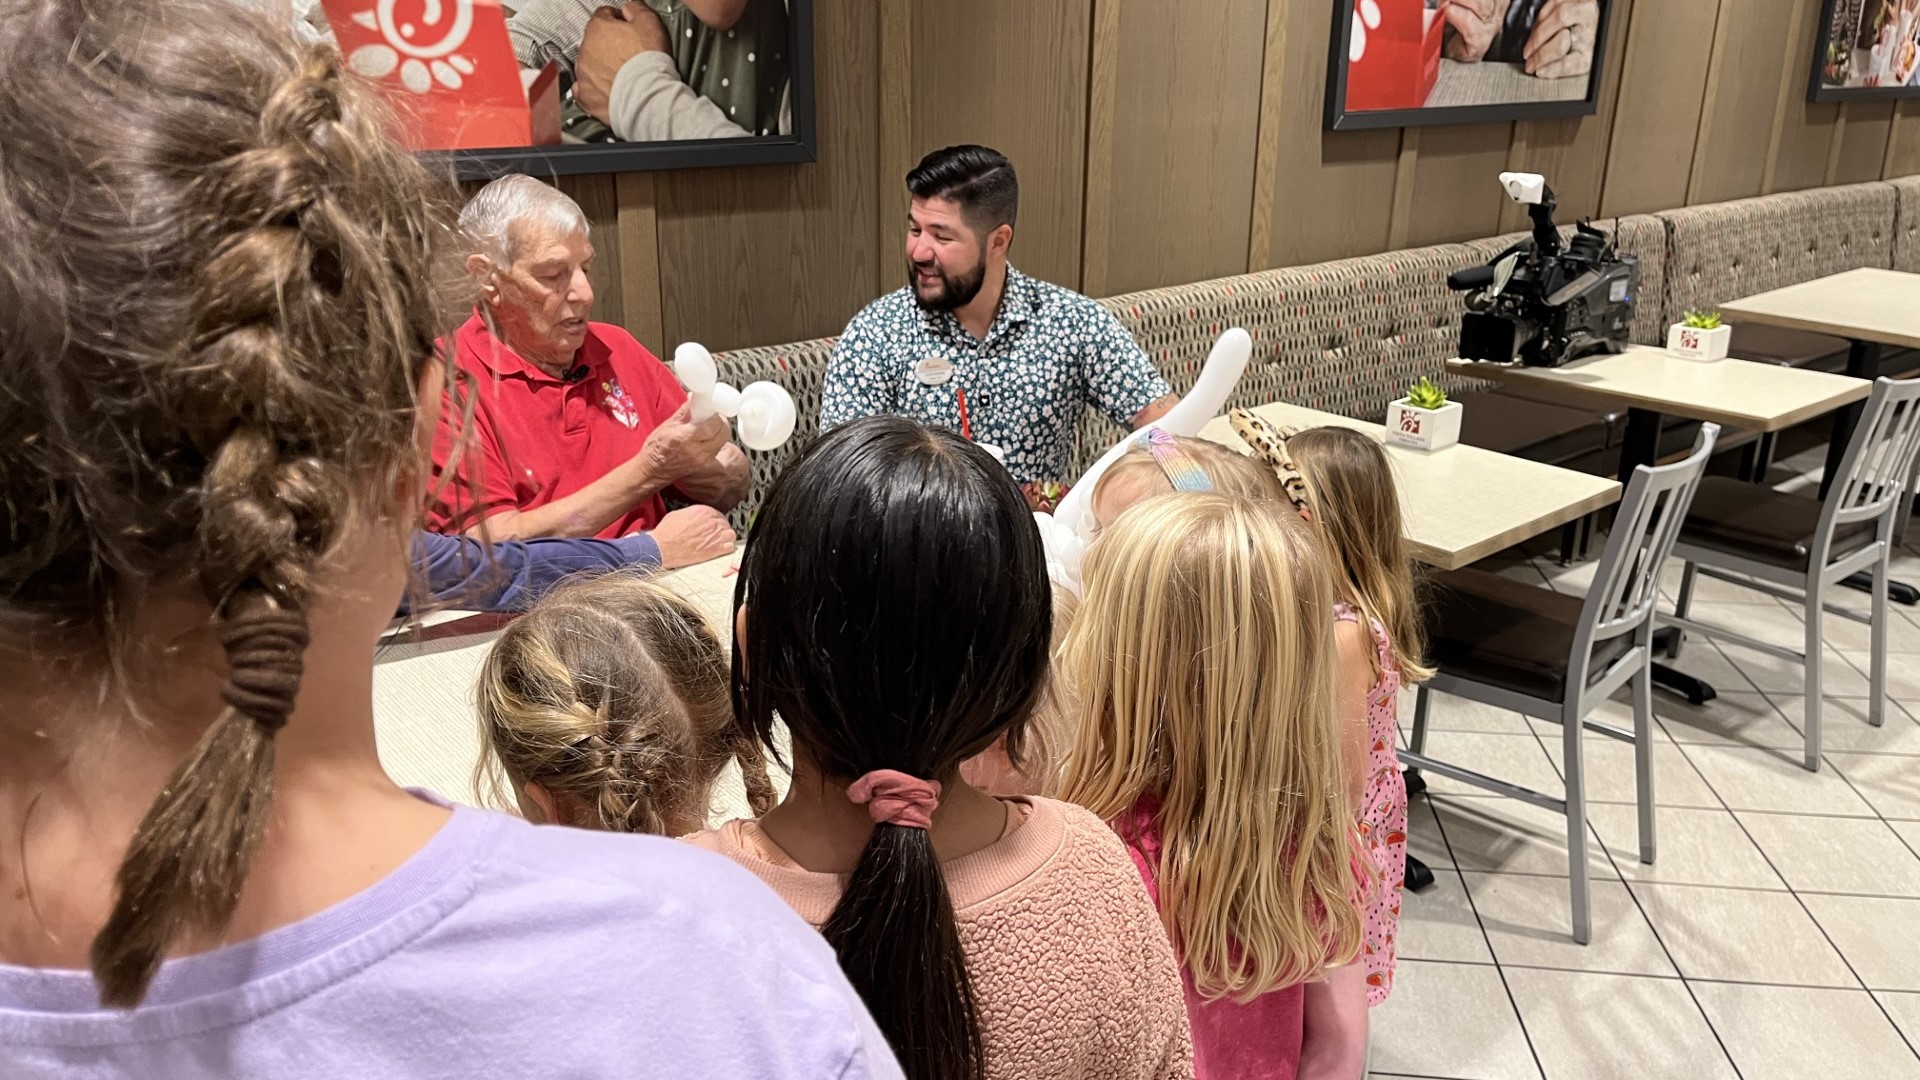 Mr. Hugh was lonely after his wife passed away. Chick-fil-A filled his life with food and friends.